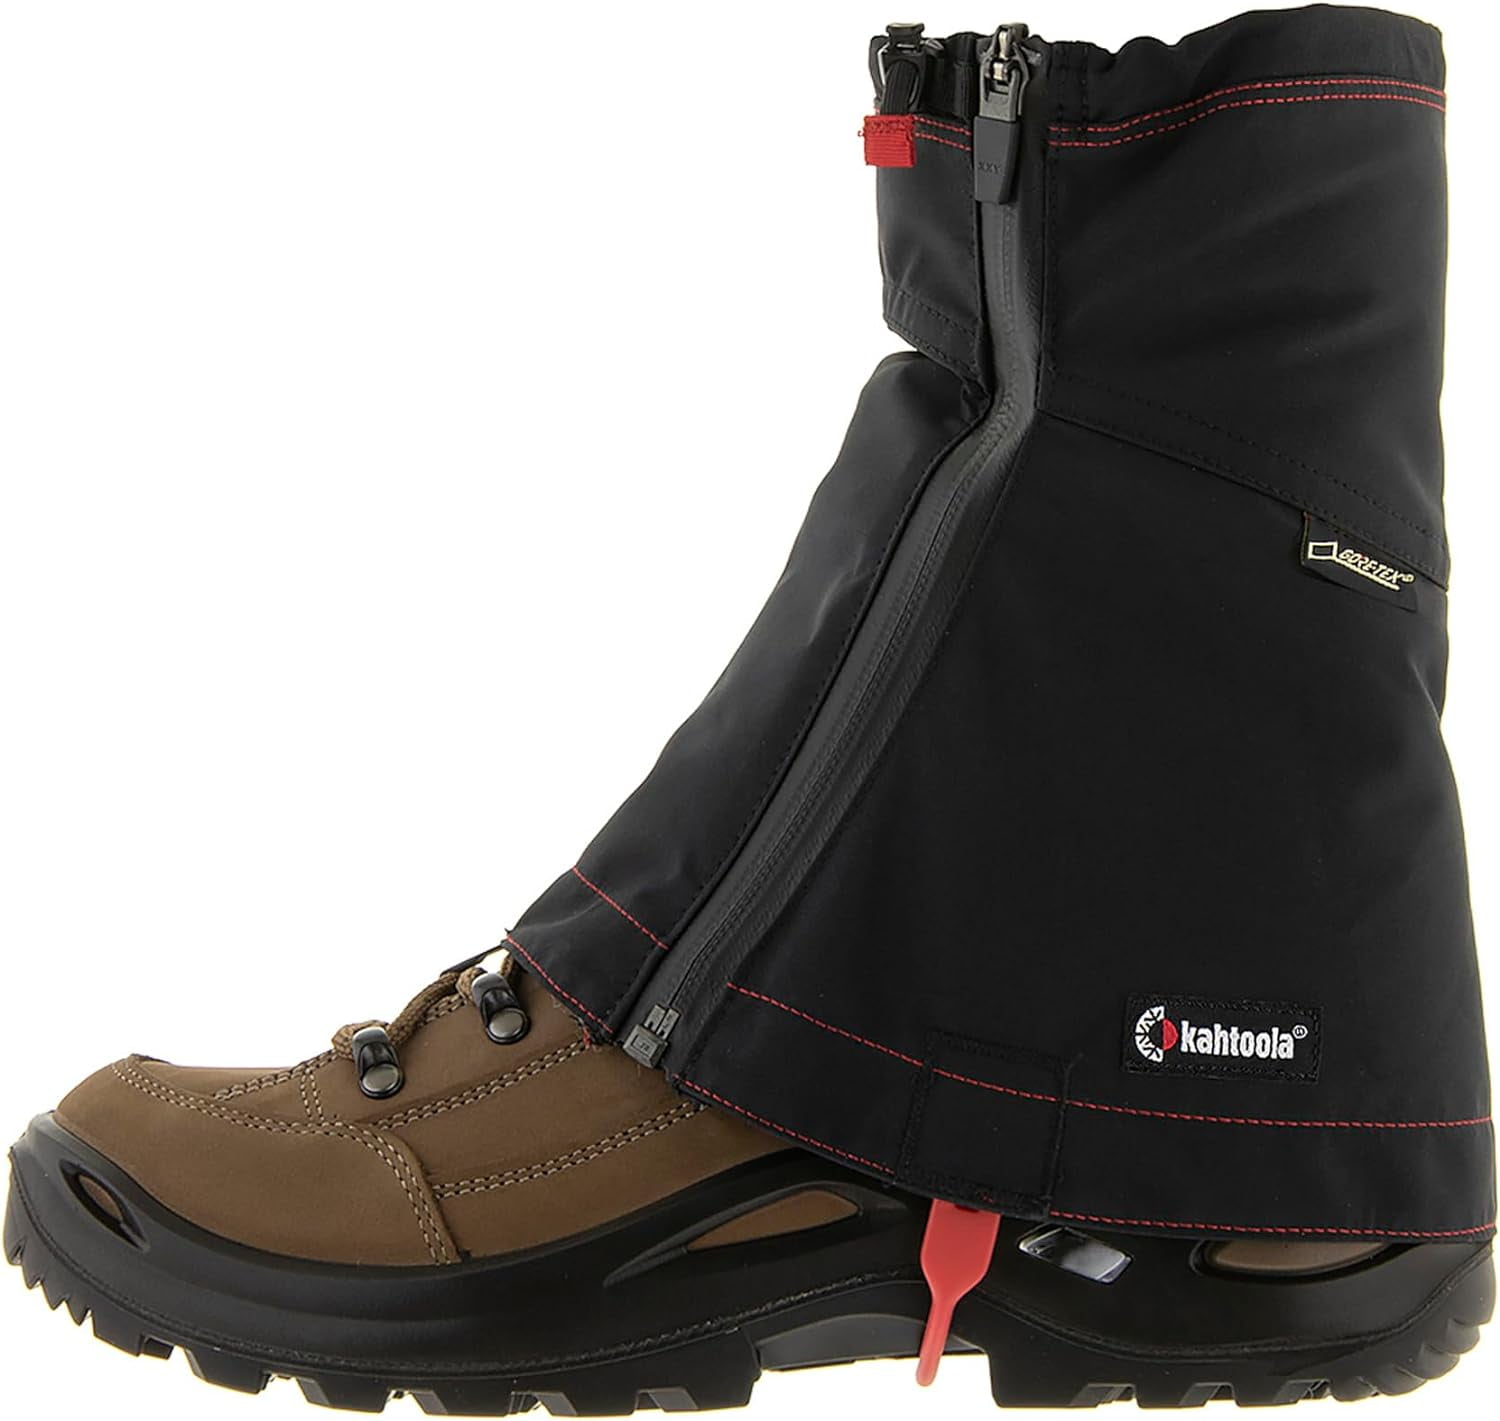 Levagaiter GTX Gaiters, Waterproof Gore-TEX Shoe & Boot Protection For ...